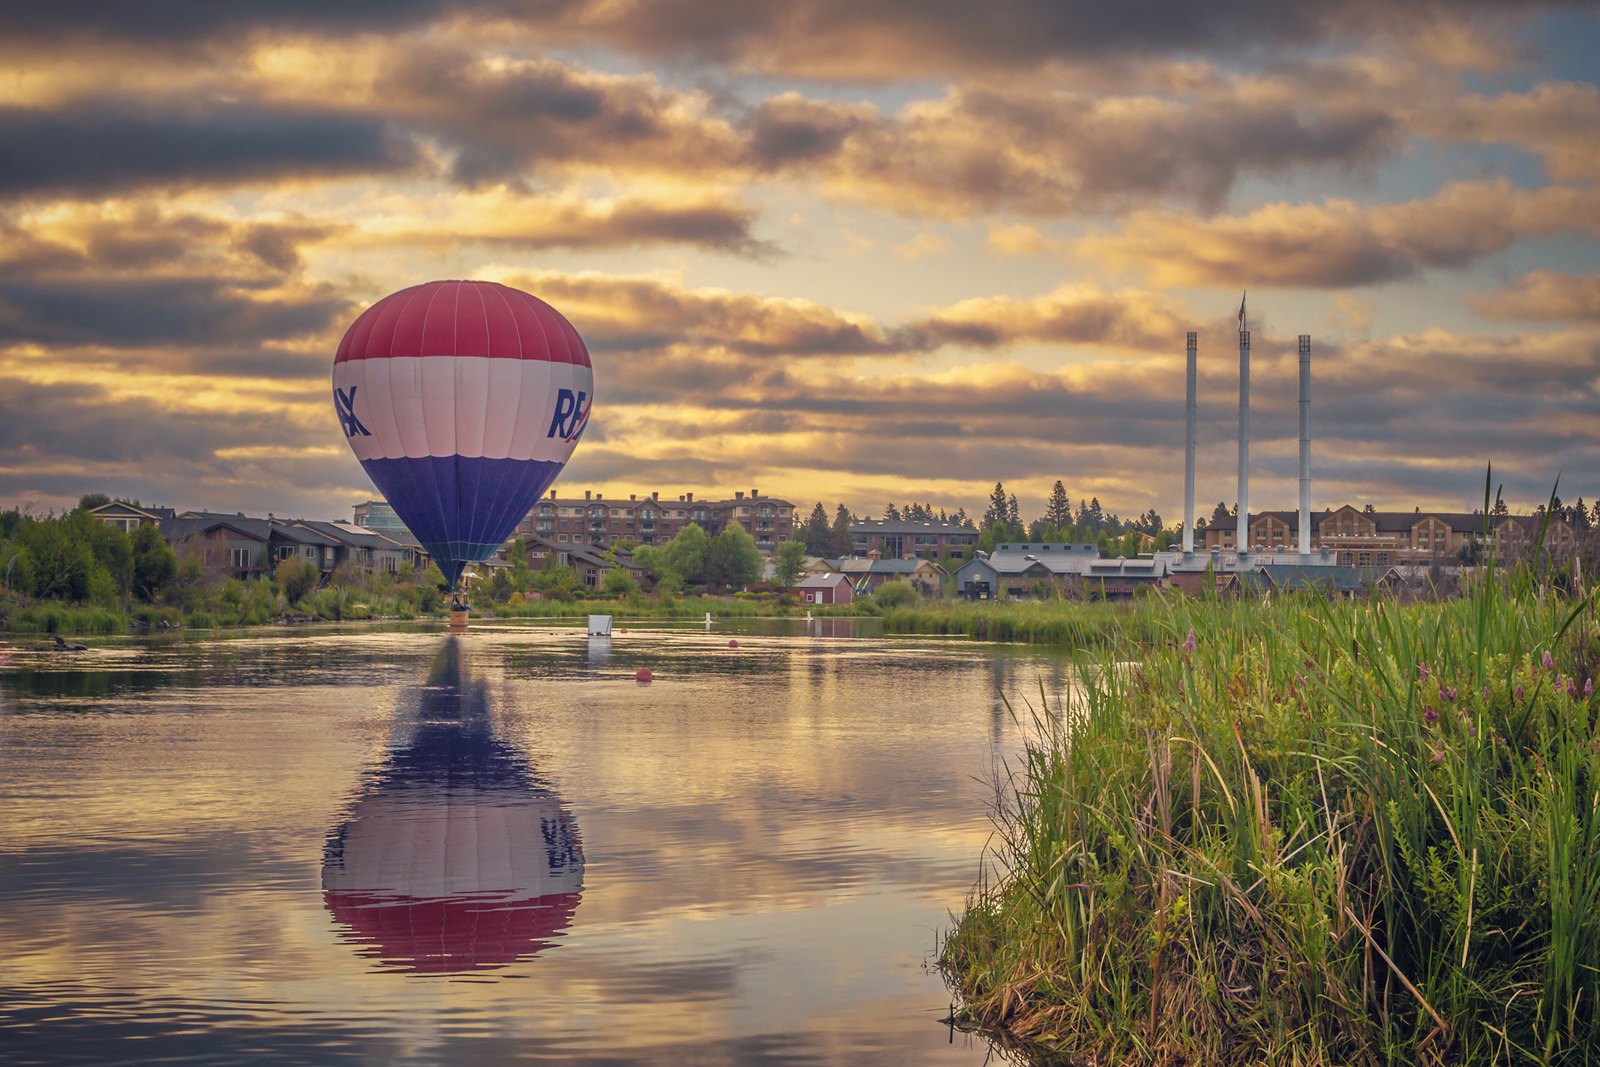 Don't Miss Balloons Over Bend, Returning Summer of 2021